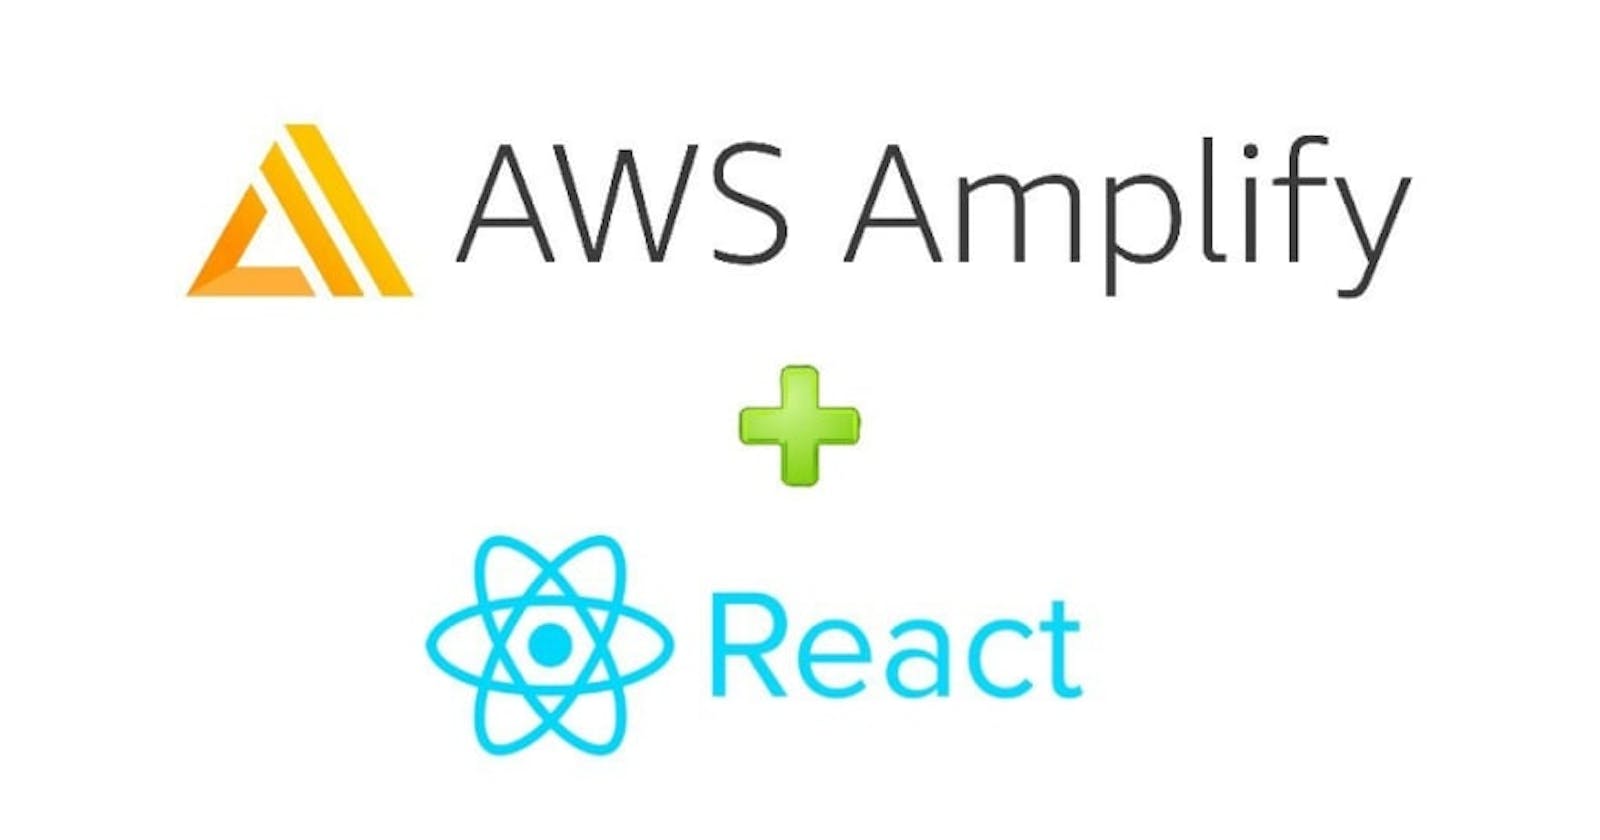 Deploy React App using AWS Amplify in 2022